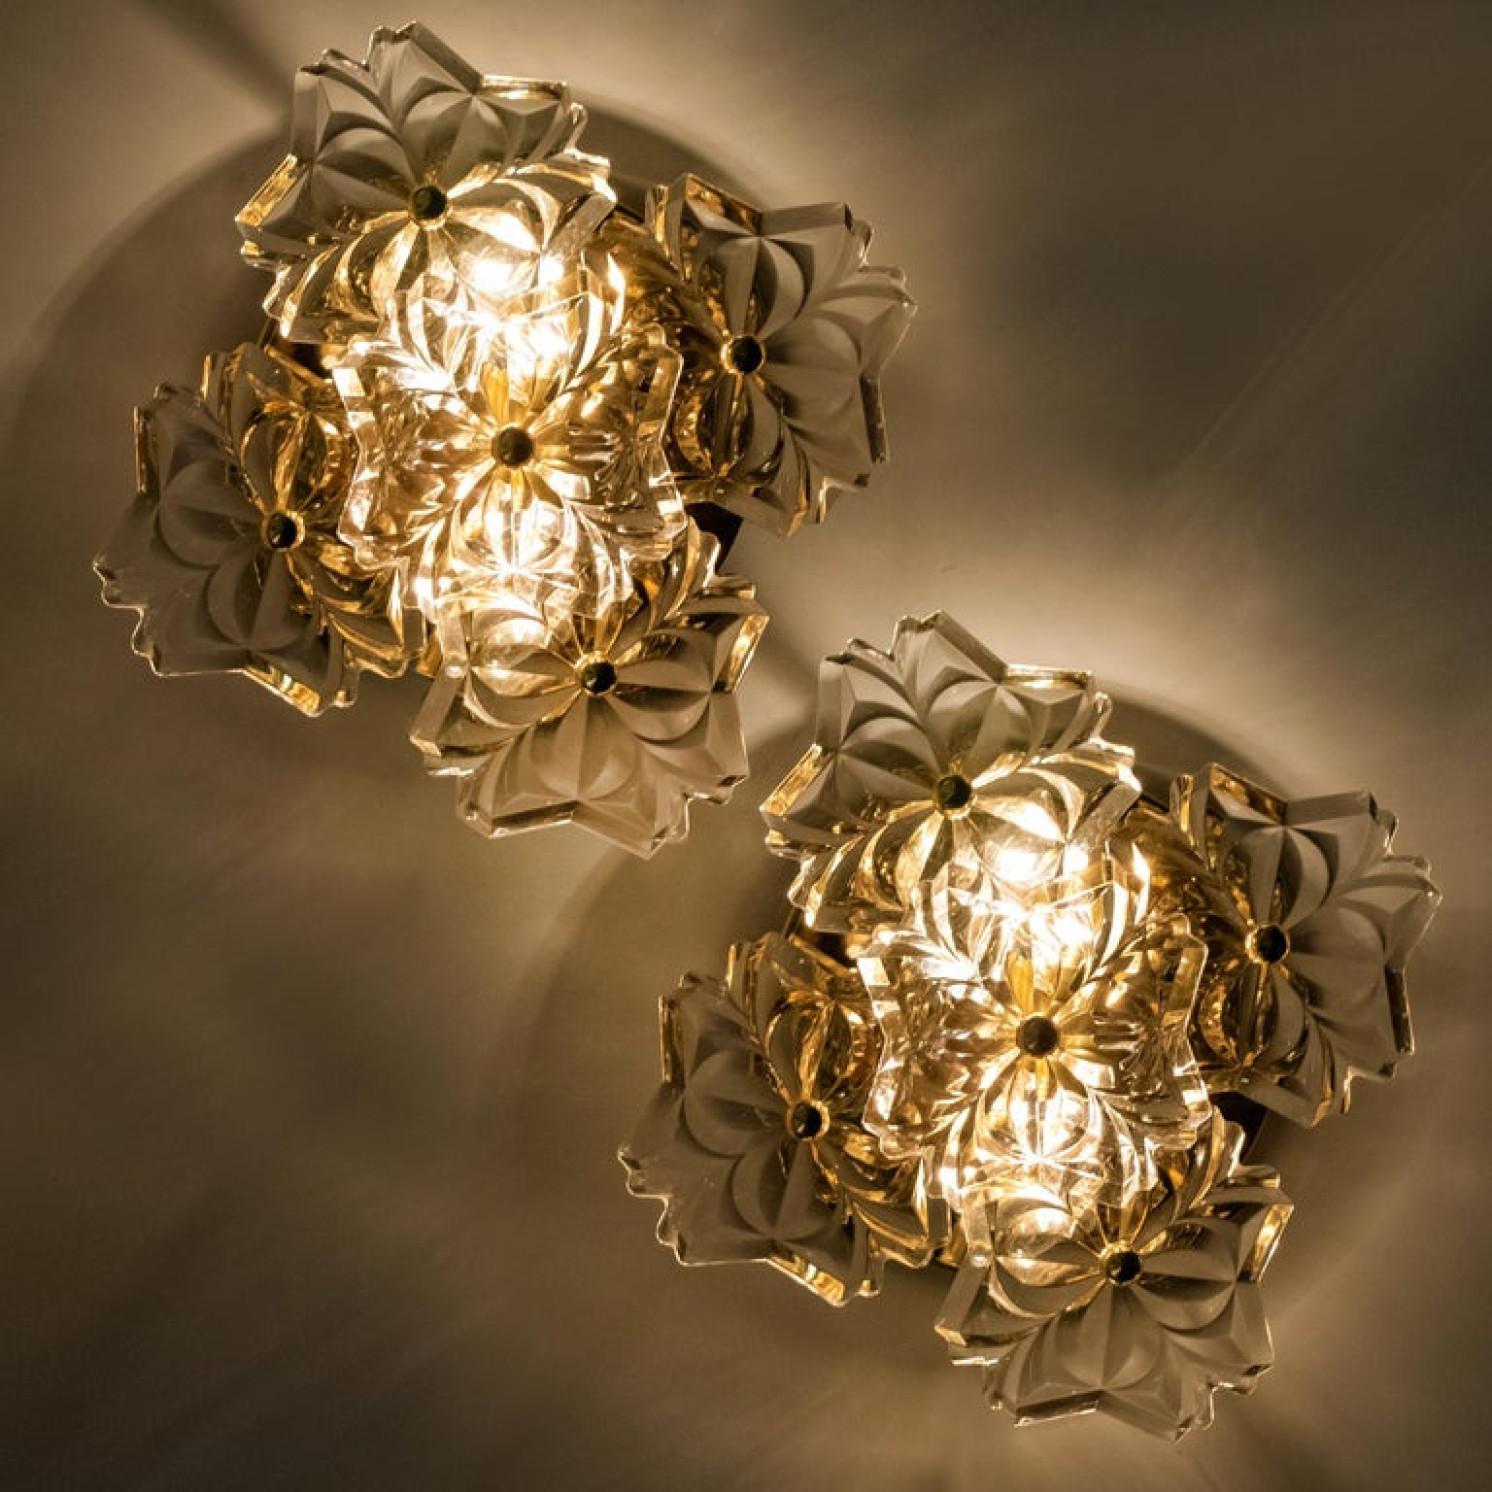 Pair of Midcentury Brass Floral Wall Lights by Hillebrand, 1970s For Sale 6